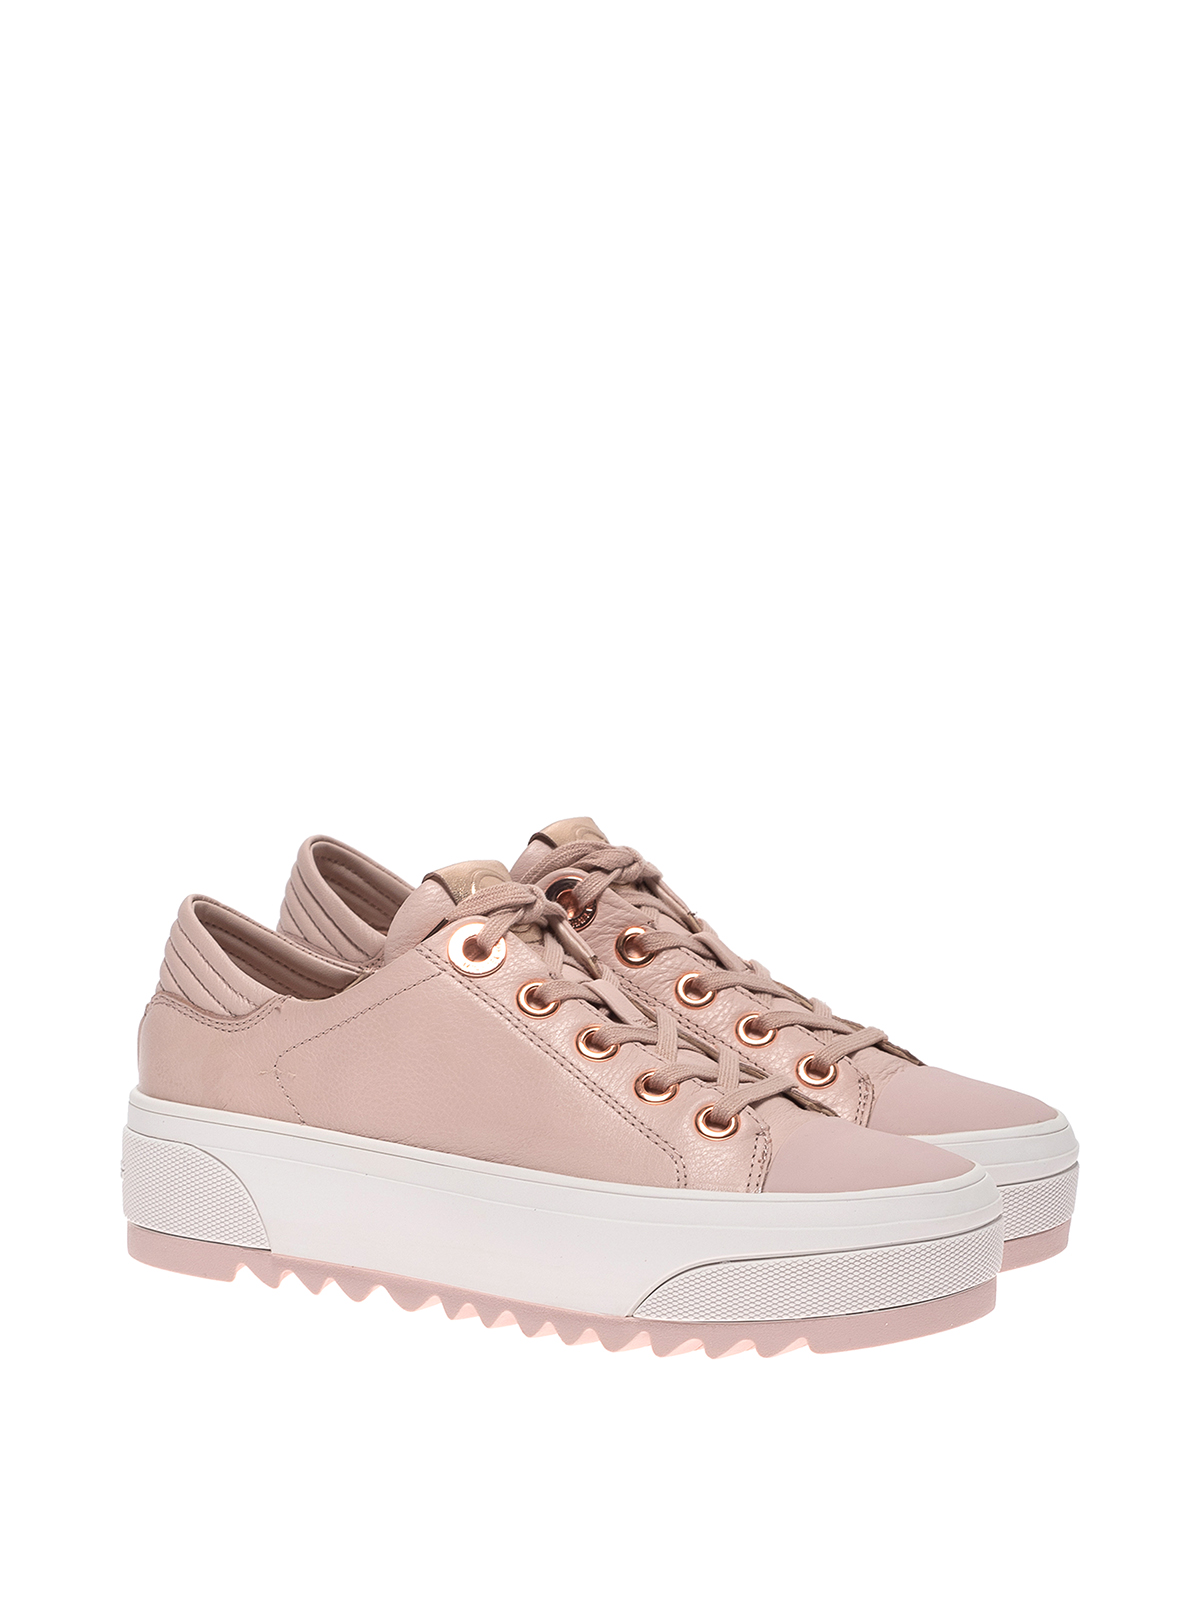 michael kors lace up sneakers